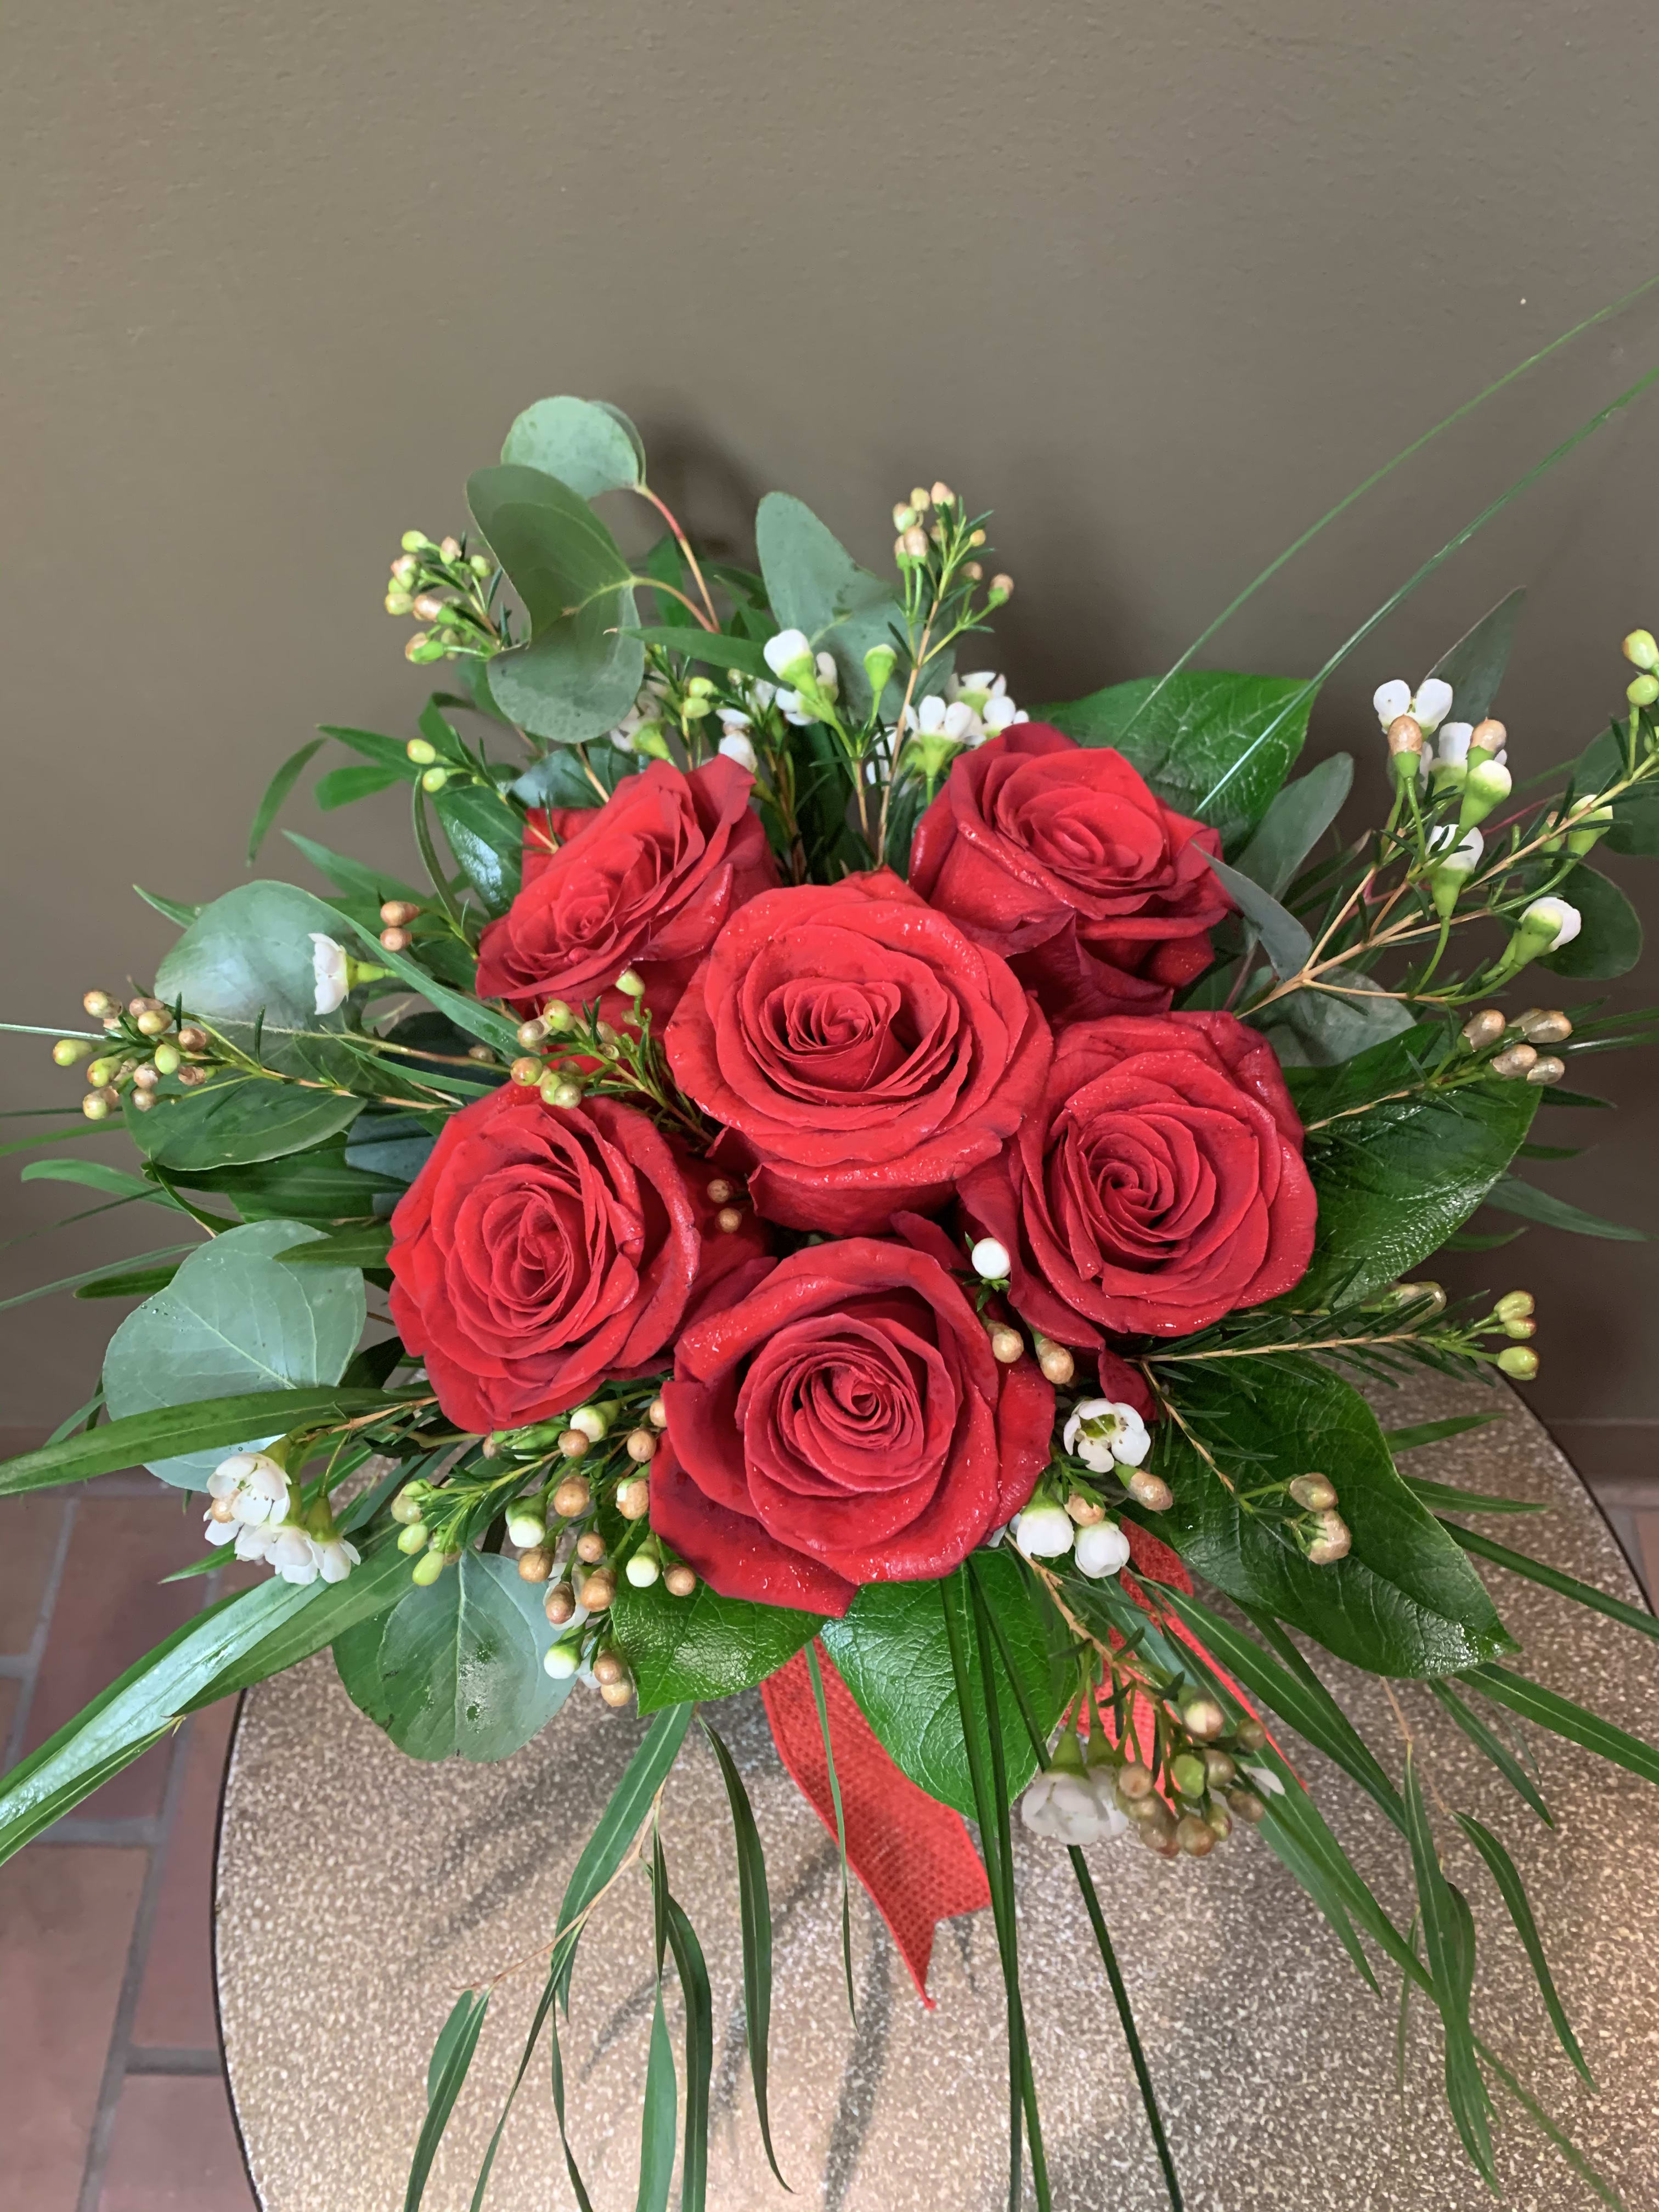 6 Low and Lush Roses  - We design most of our roses hand tied which means they are grouped shorter in the vase, surrounded by the greenery and accent flowers. This increases the vase life of the flowers substantially, and may be ordered in a variety of colors. 